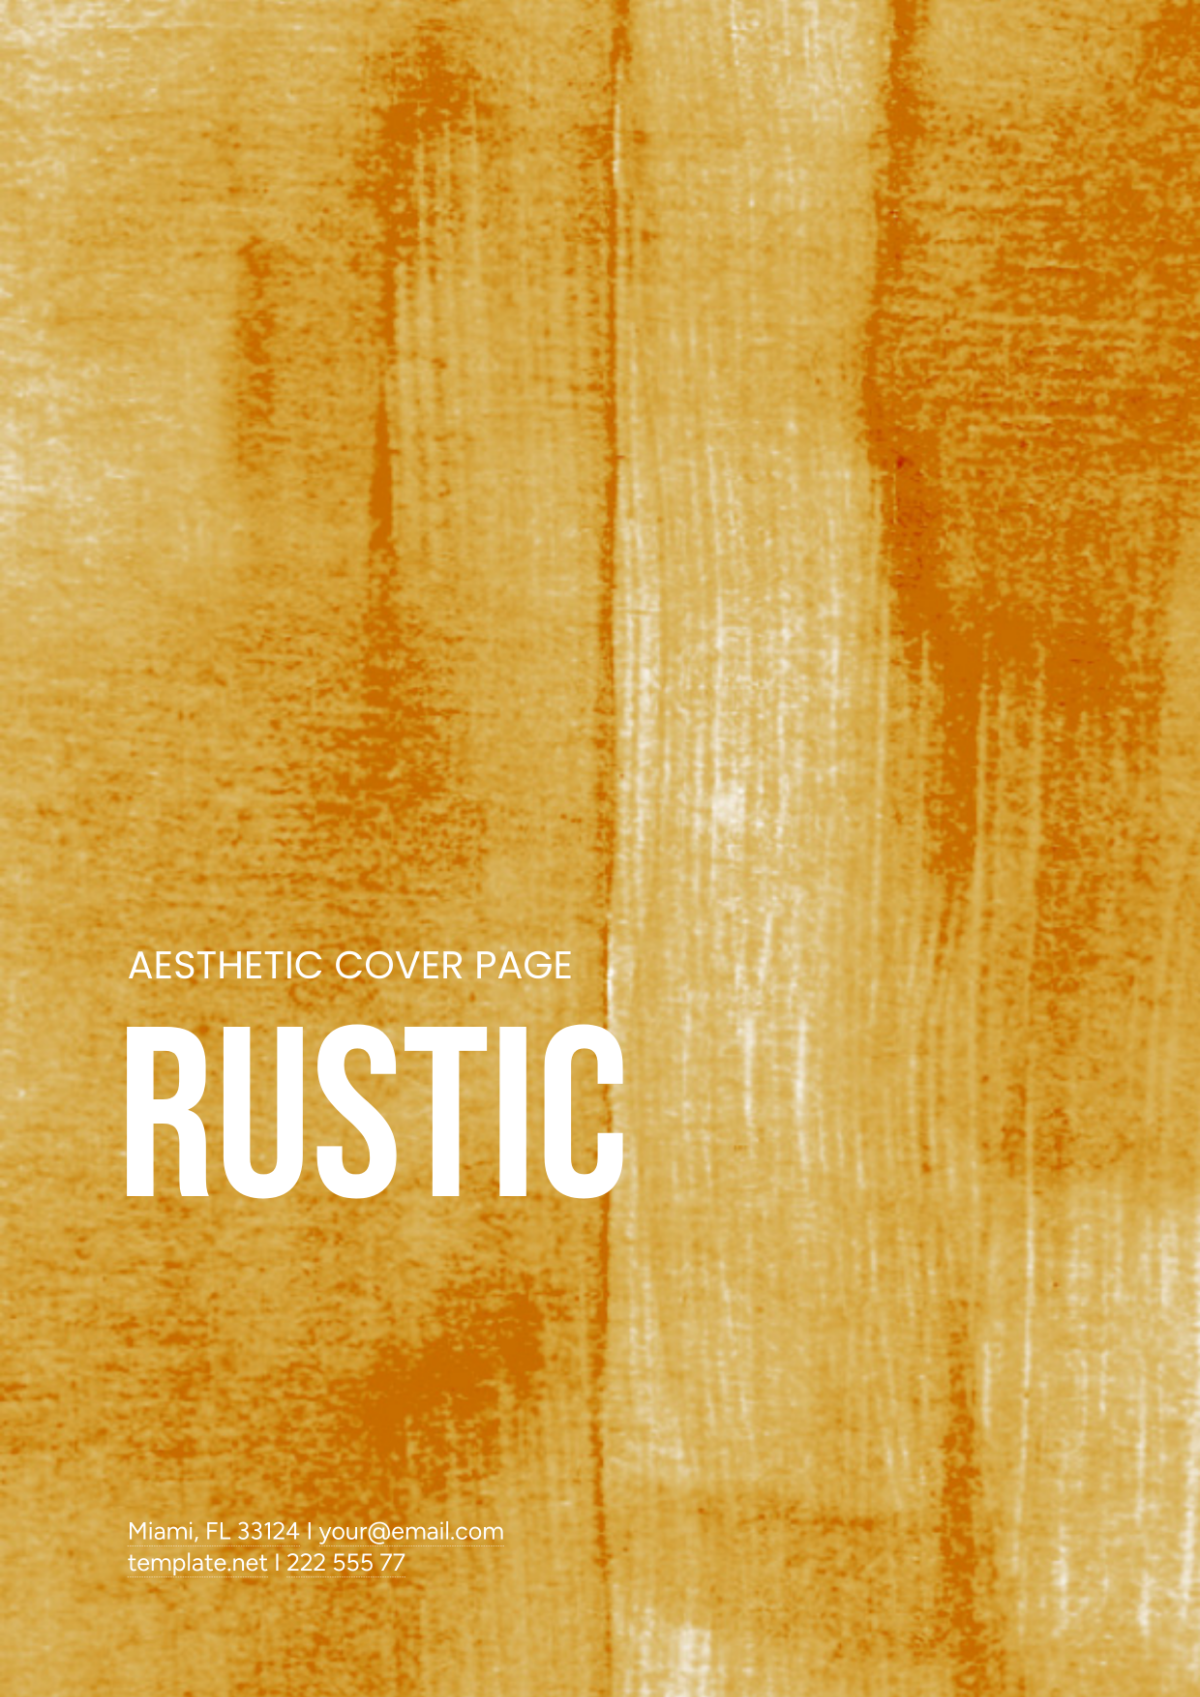 Rustic Aesthetic Cover Page Template